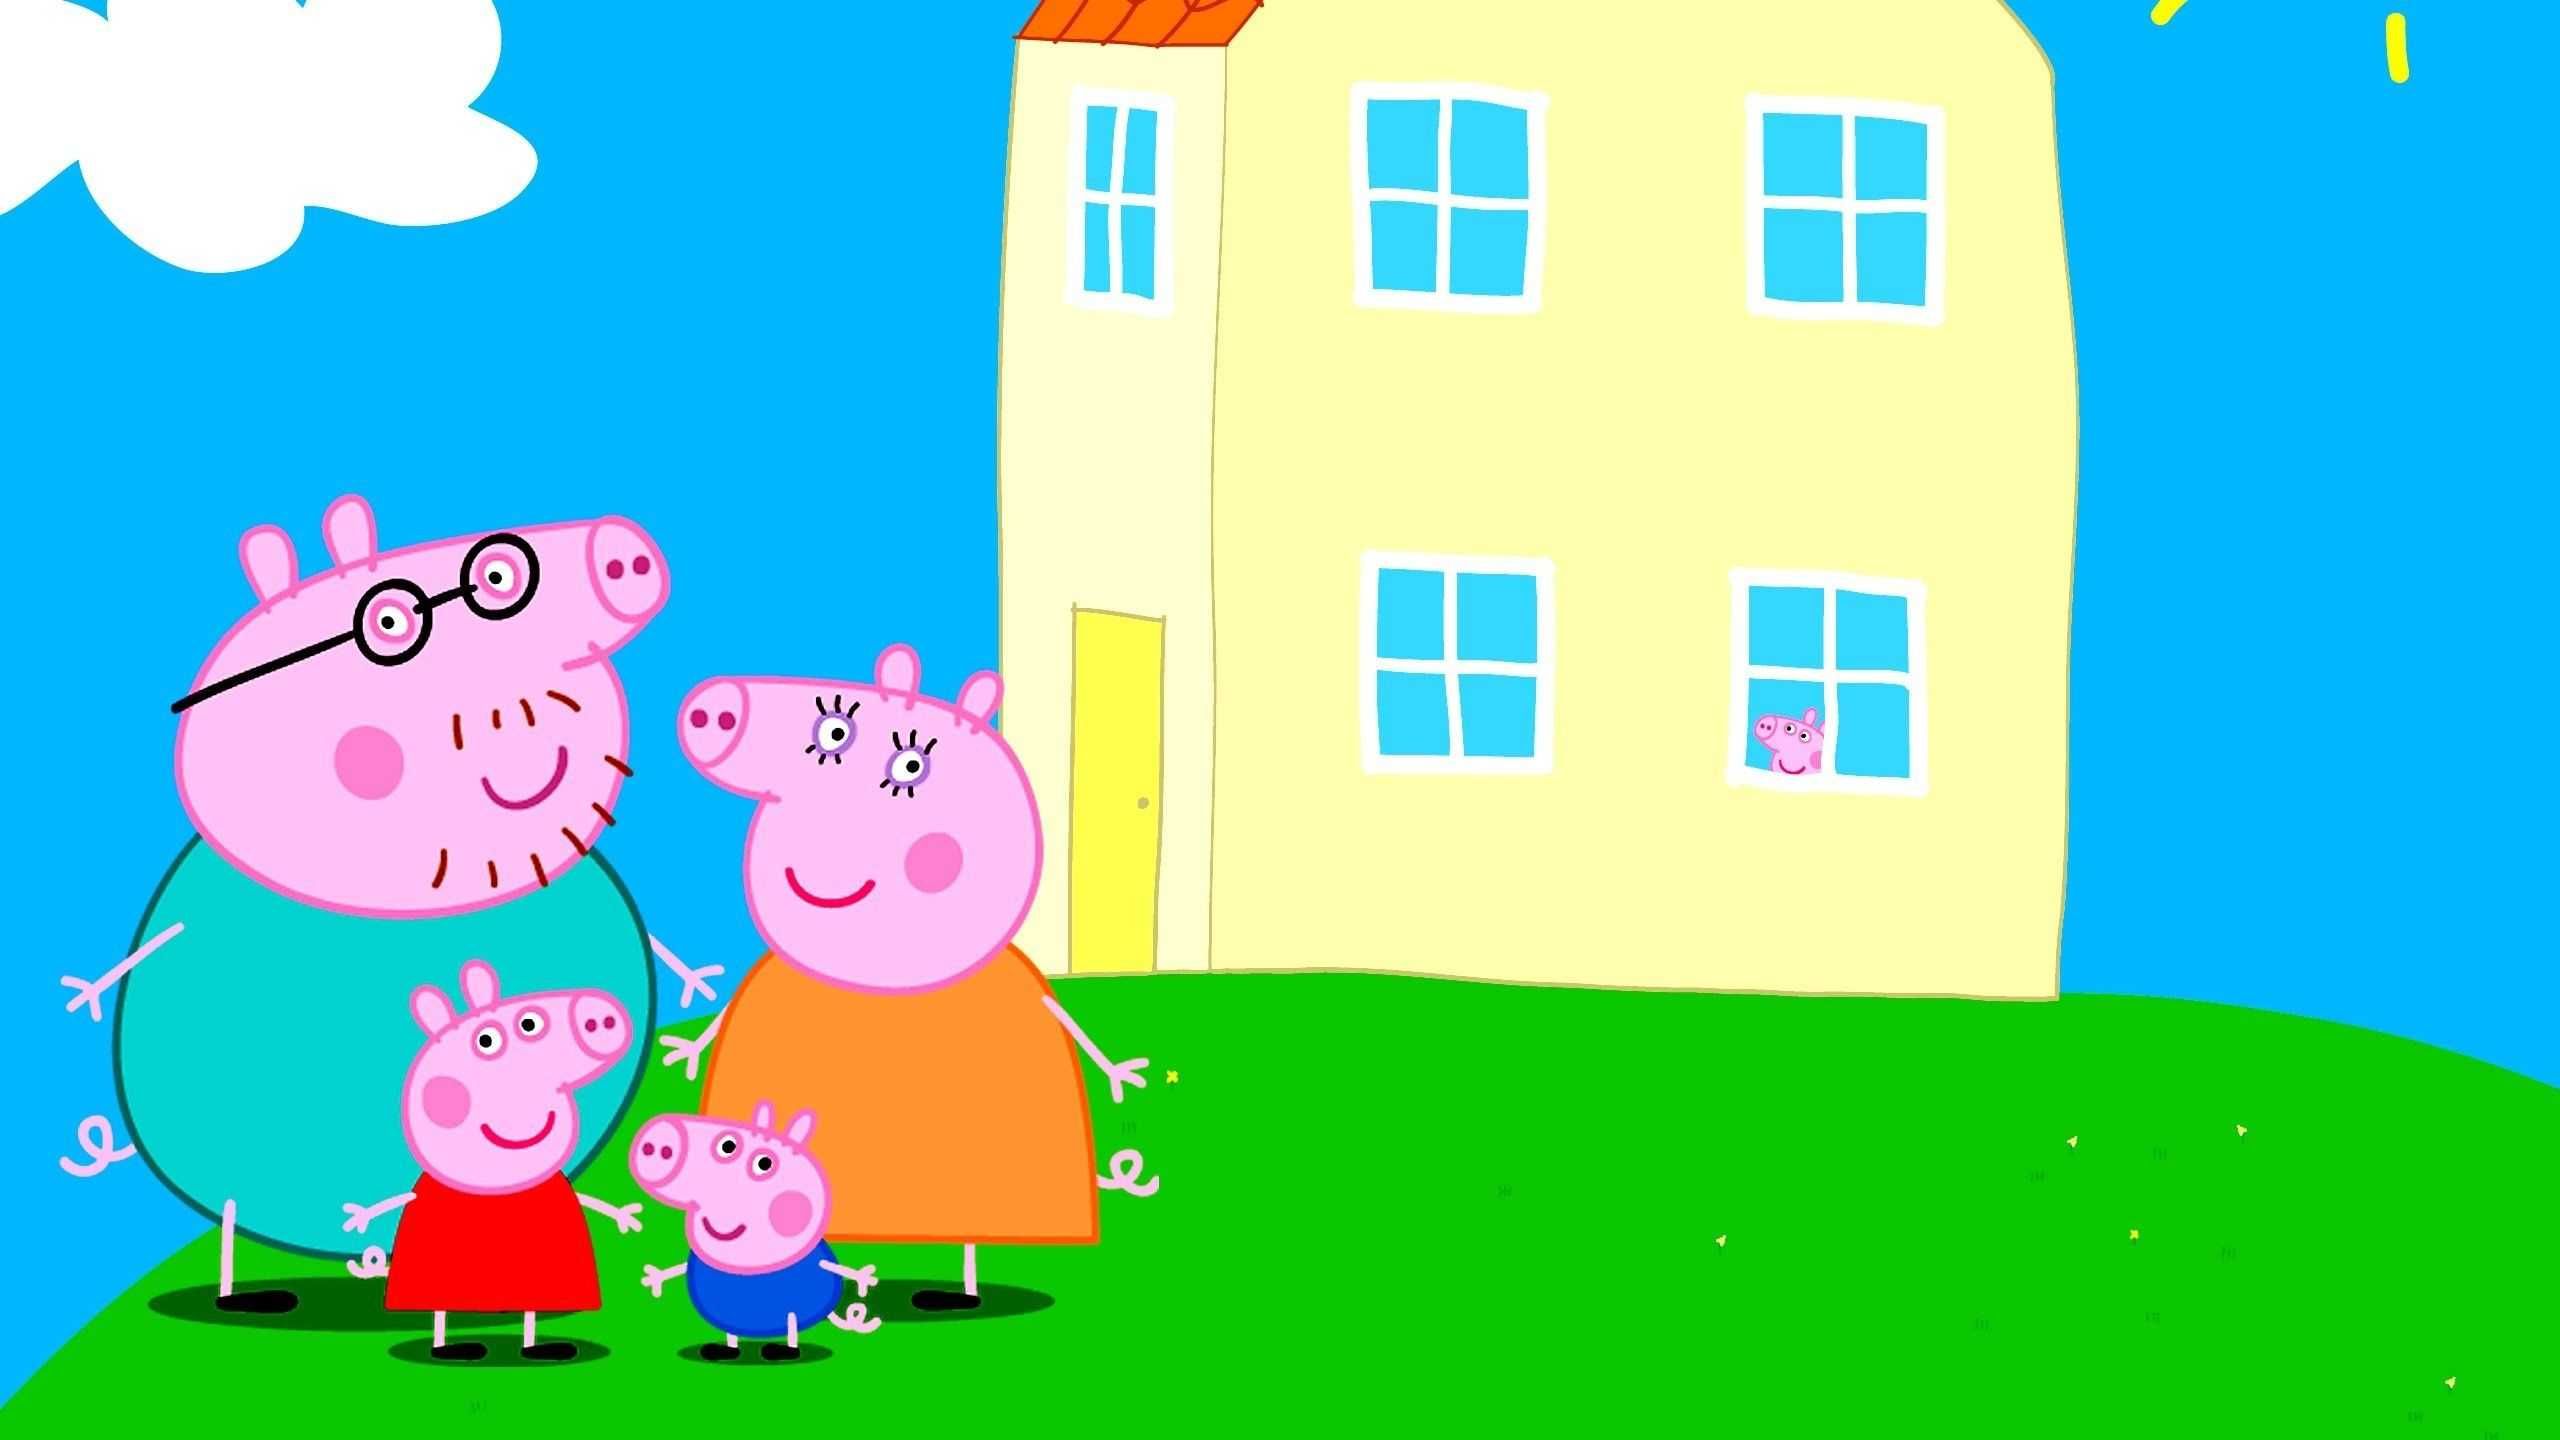 A cartoon of pepa and his family standing in front - George Pig, Peppa Pig